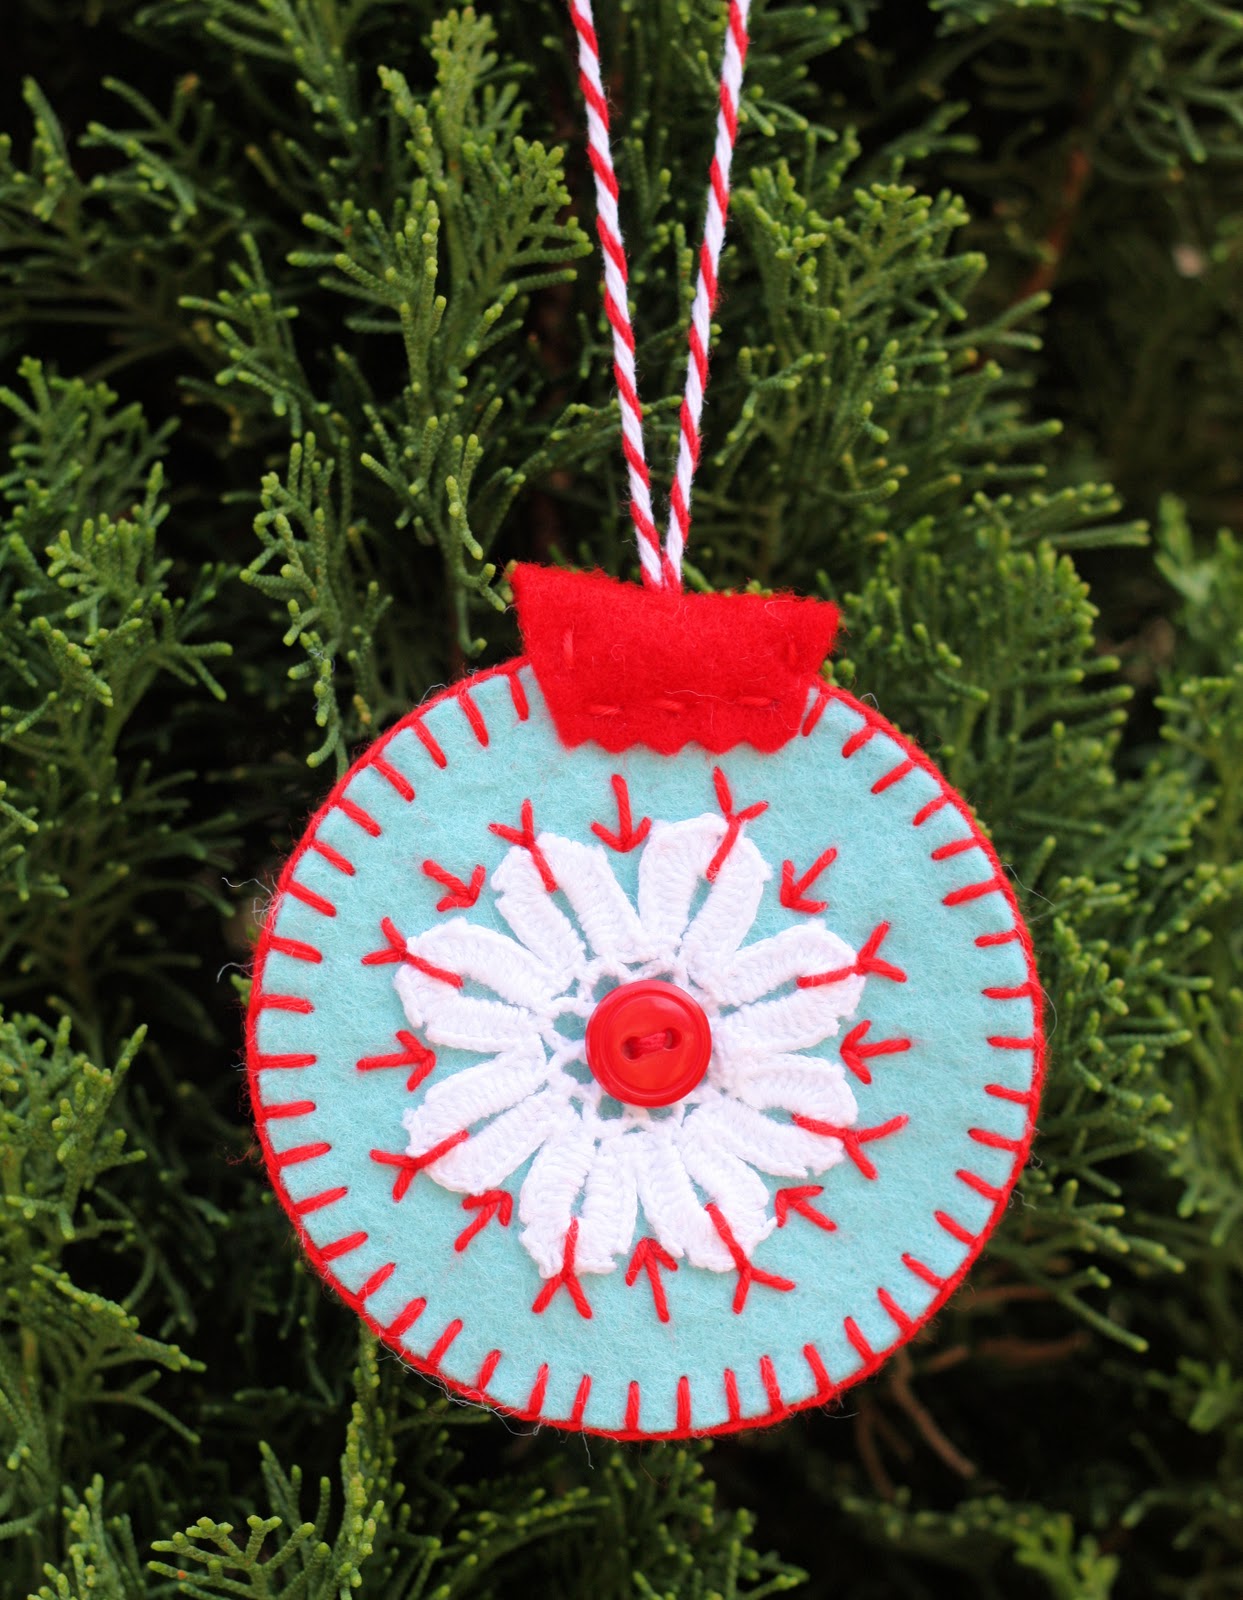 Homemade Christmas Ornaments - A Spoonful of Sugar